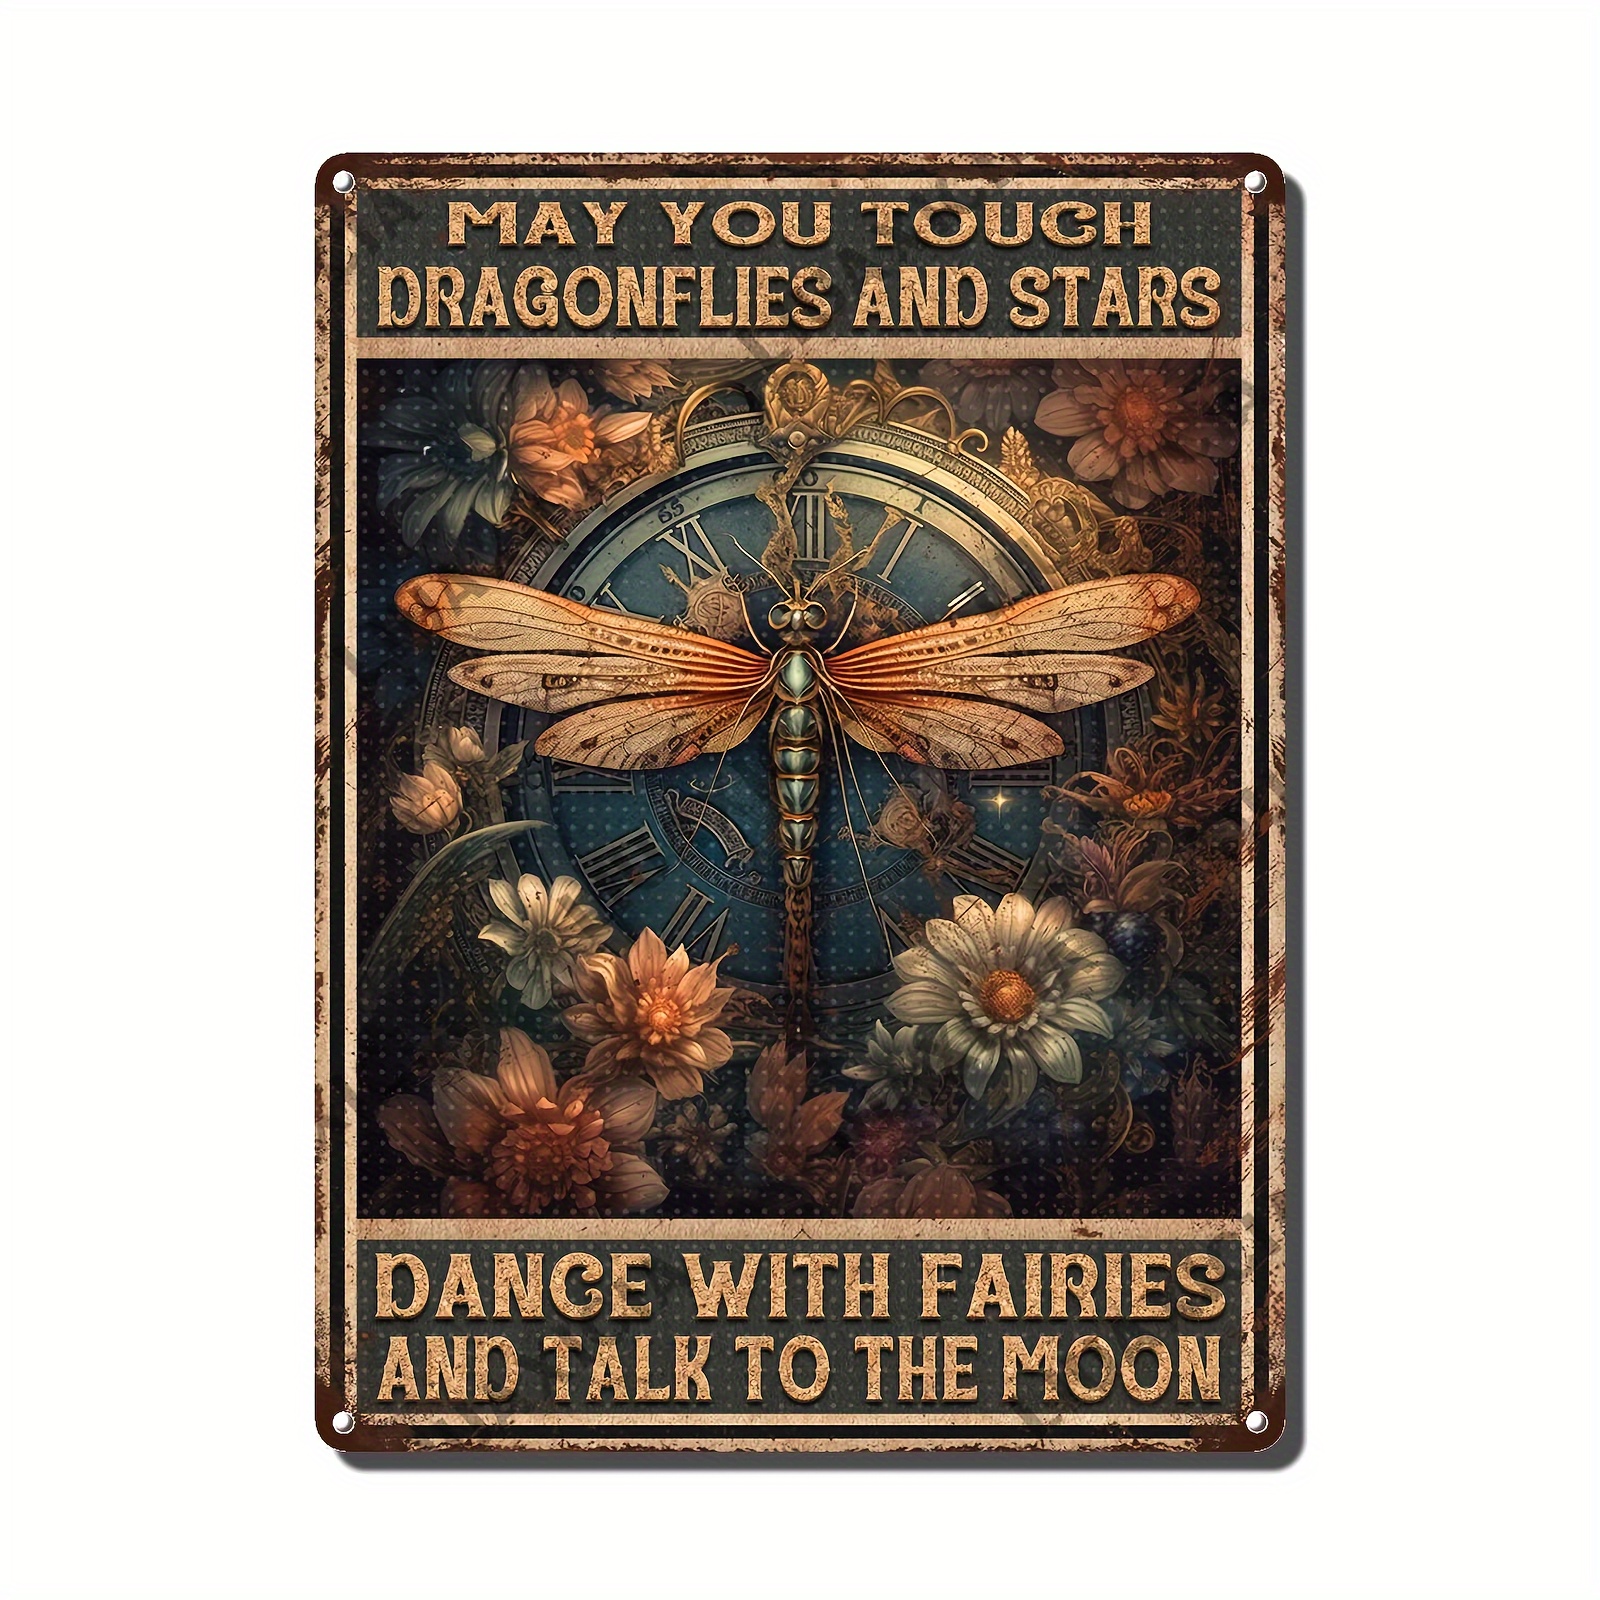 

1pc Vintage Metal Tin Sign, Dragonfly Wall Decor Funny What If I Fall Oh But My Darling Dragonfly Decor Metal Sign Vintage Toilet Decoration Metal Sign 8x12 Inch Eid Al-adha Mubarak